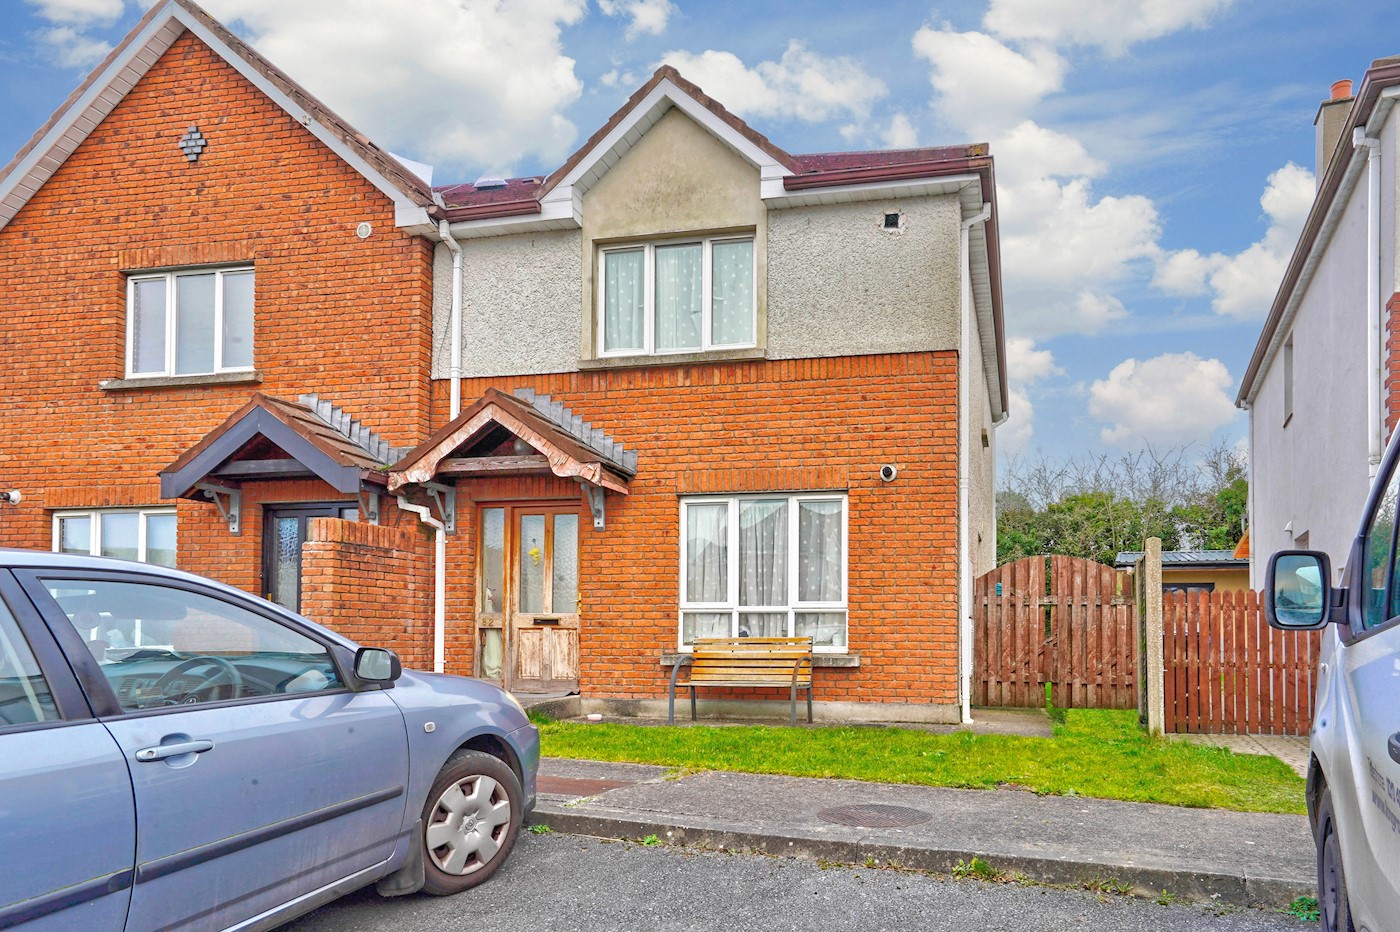 82 The Close Willow Park, Tullow Road, Carlow Town, Co. Carlow, R93 V8D6 1/5